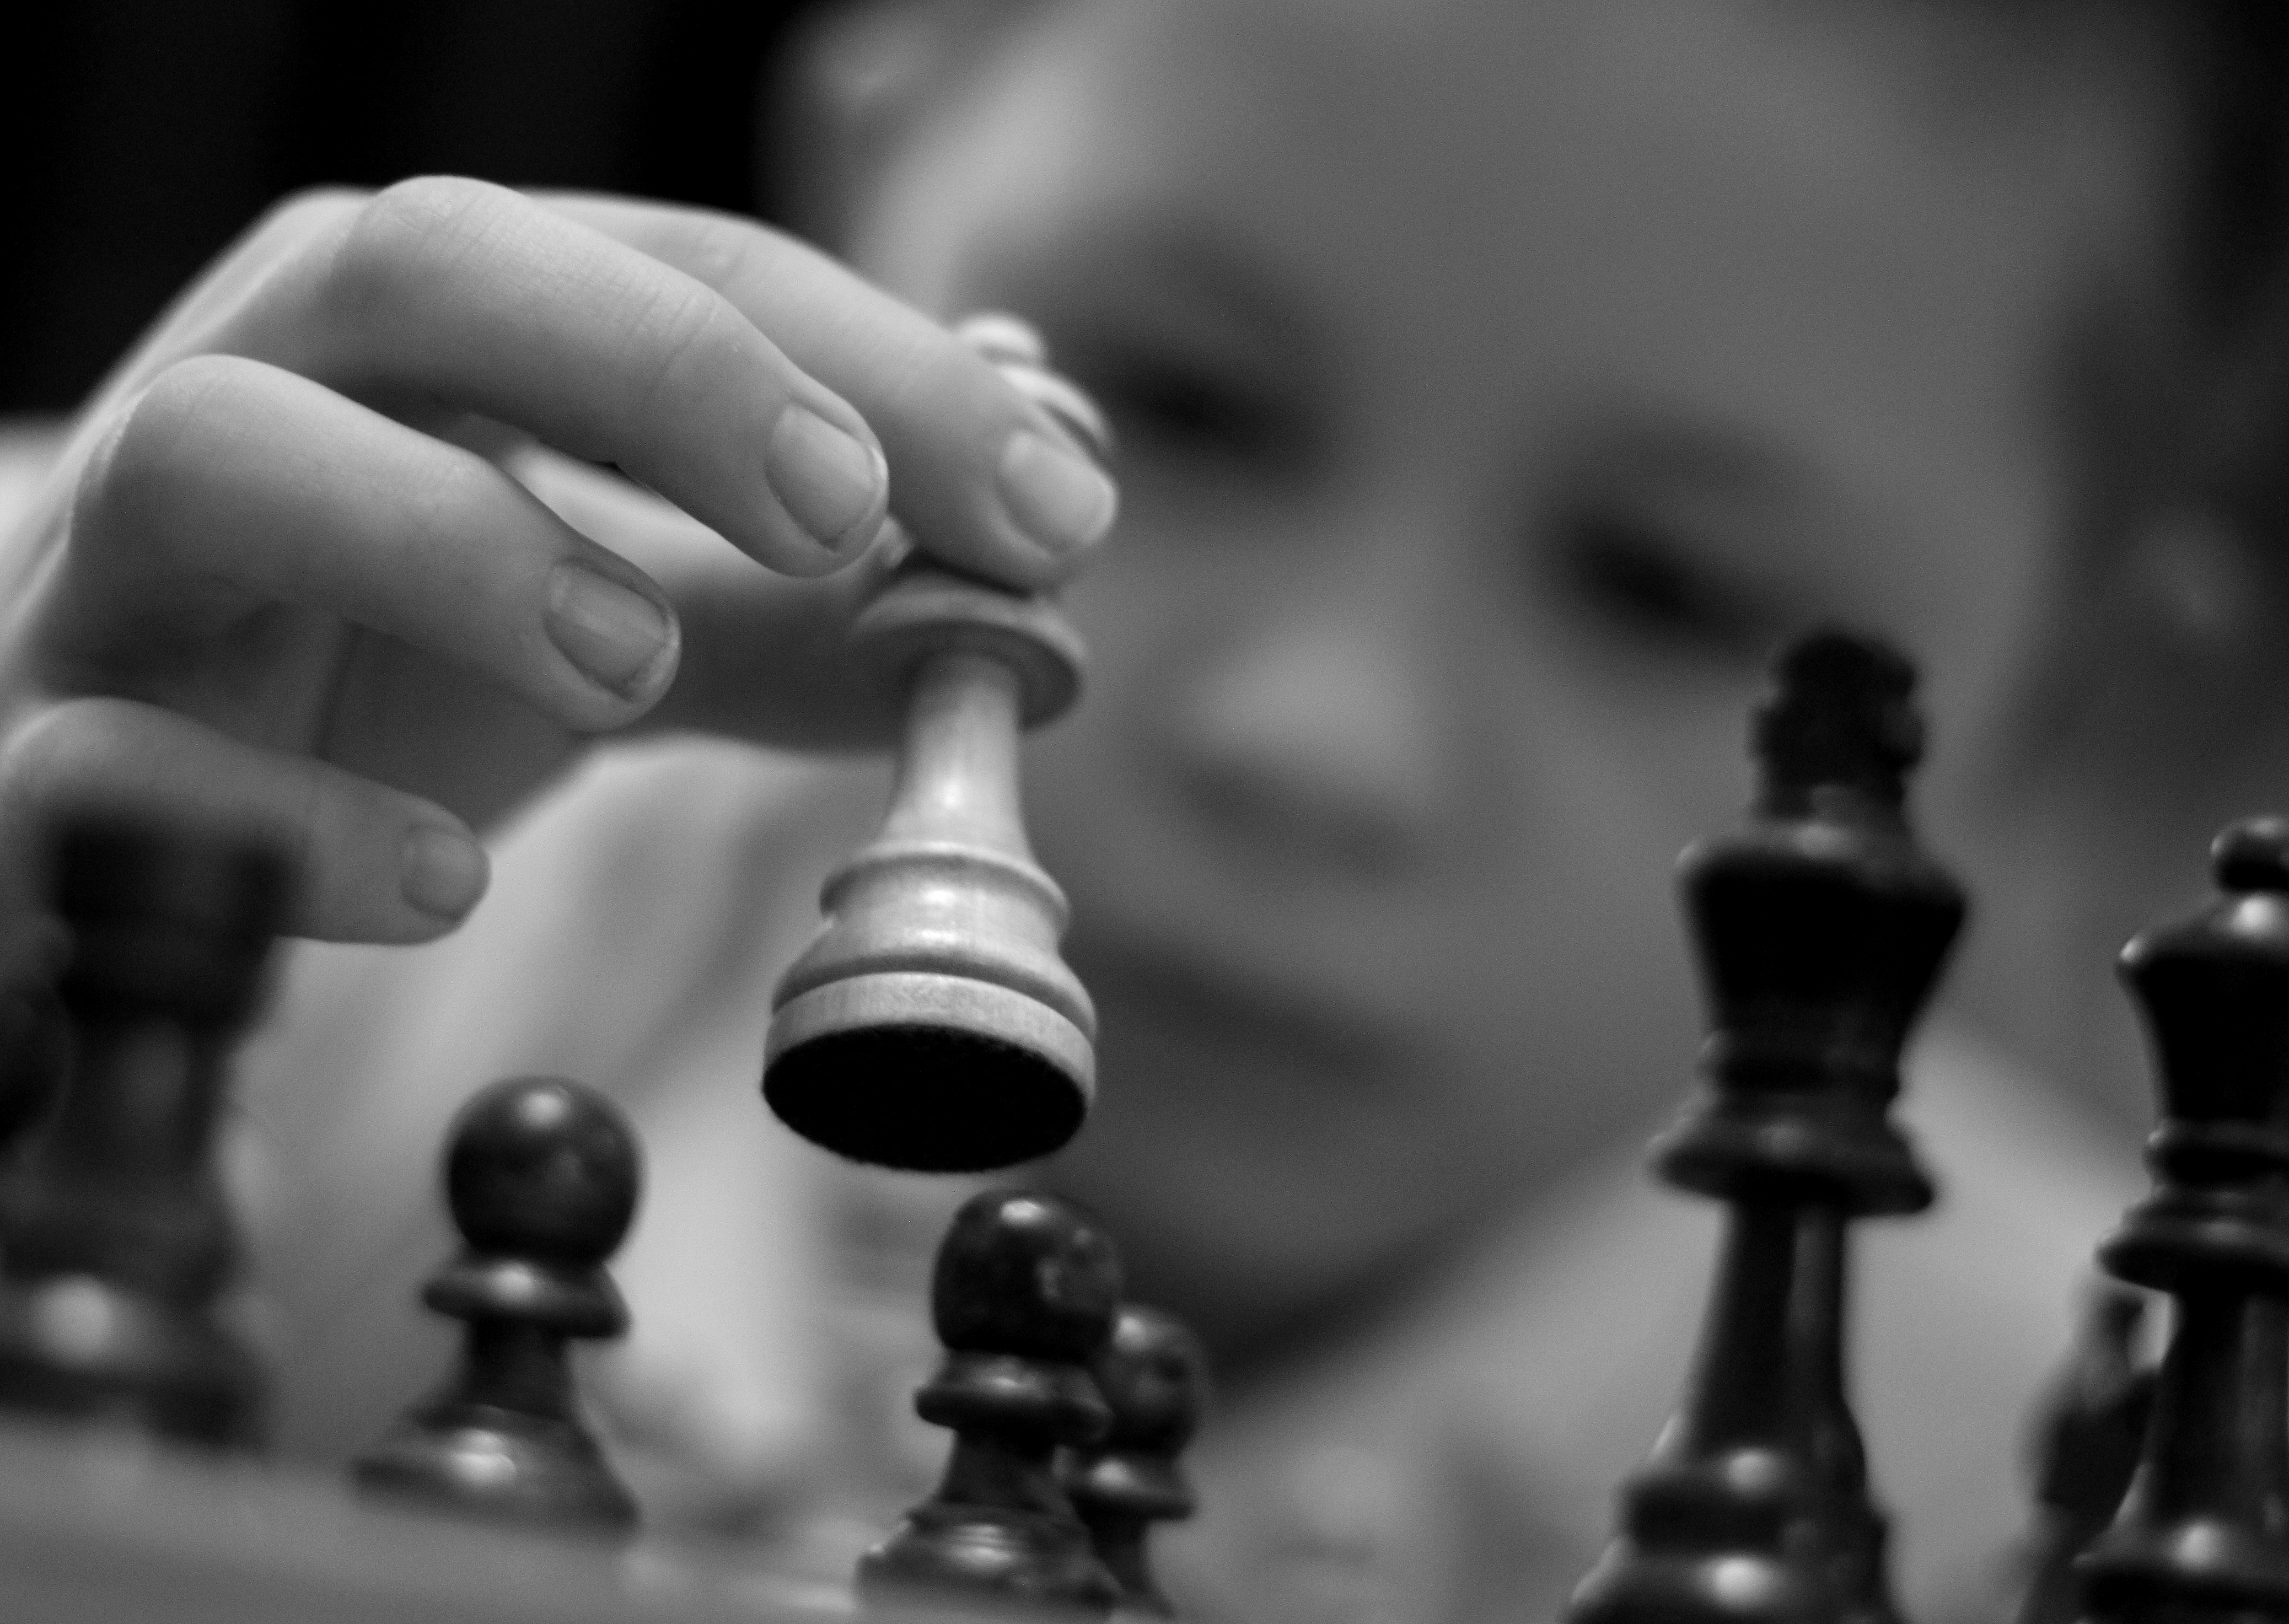 How-to-Play-Chess-How-to-Teach-Chess-to-Kids-Chess-for-Kids-Lesson-1-